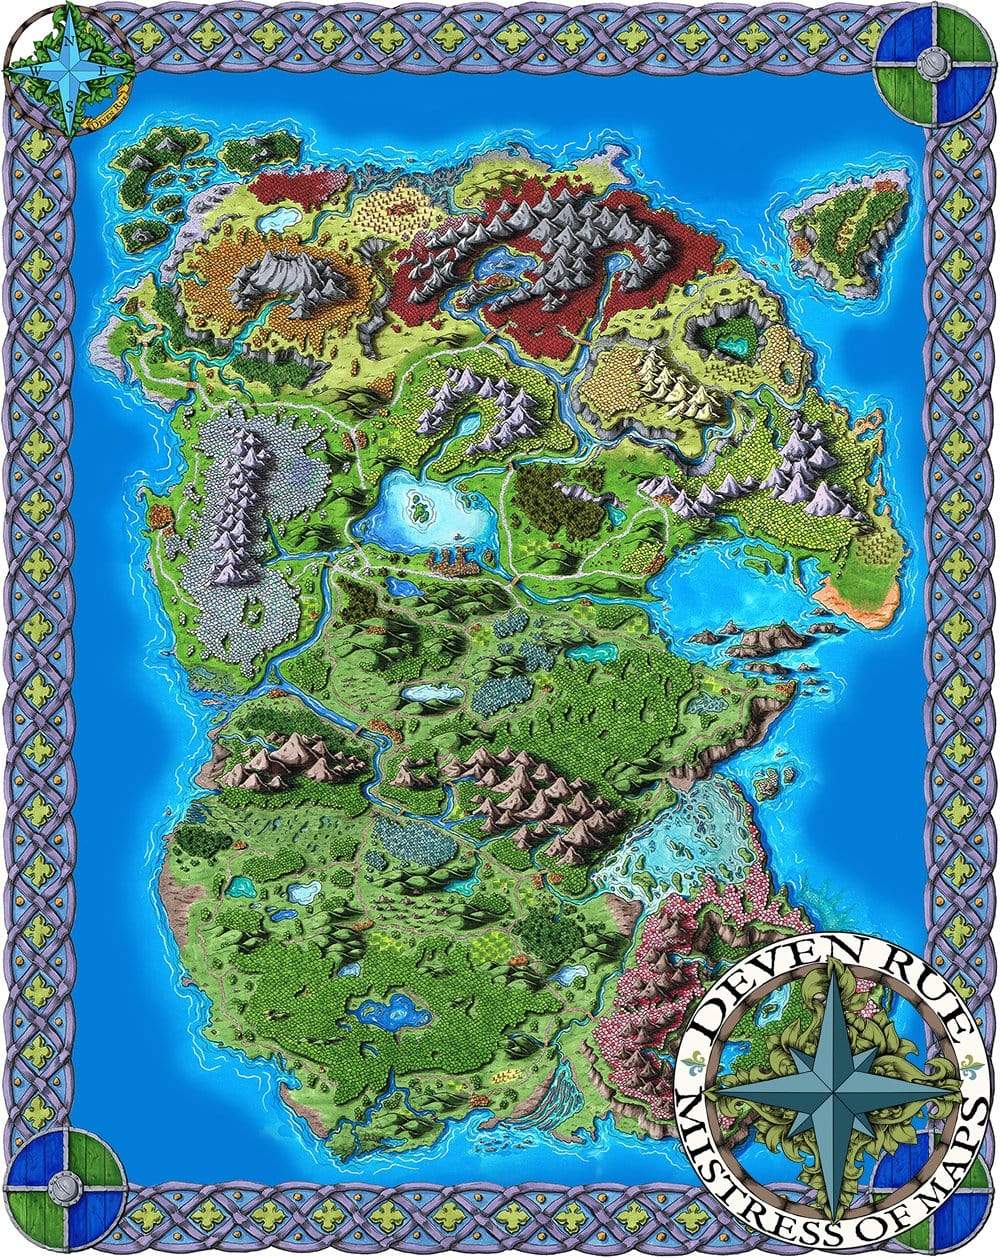 The Taur'Syldor Map by Deven Rue with no labels.